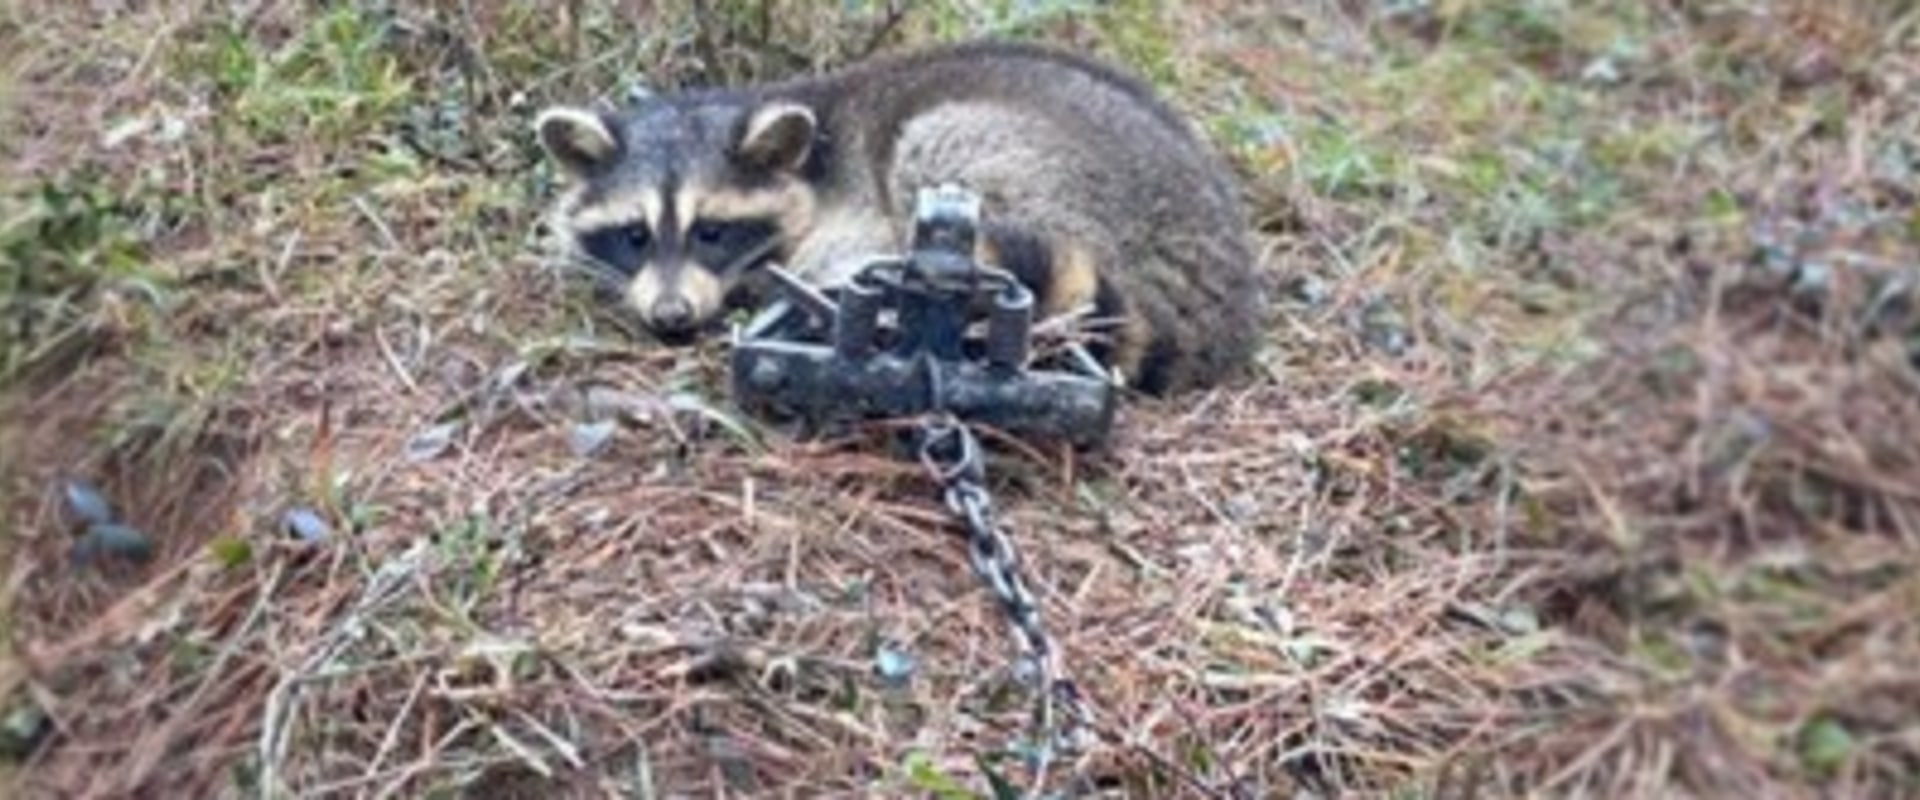 What part of wildlife management involves trapping animals?